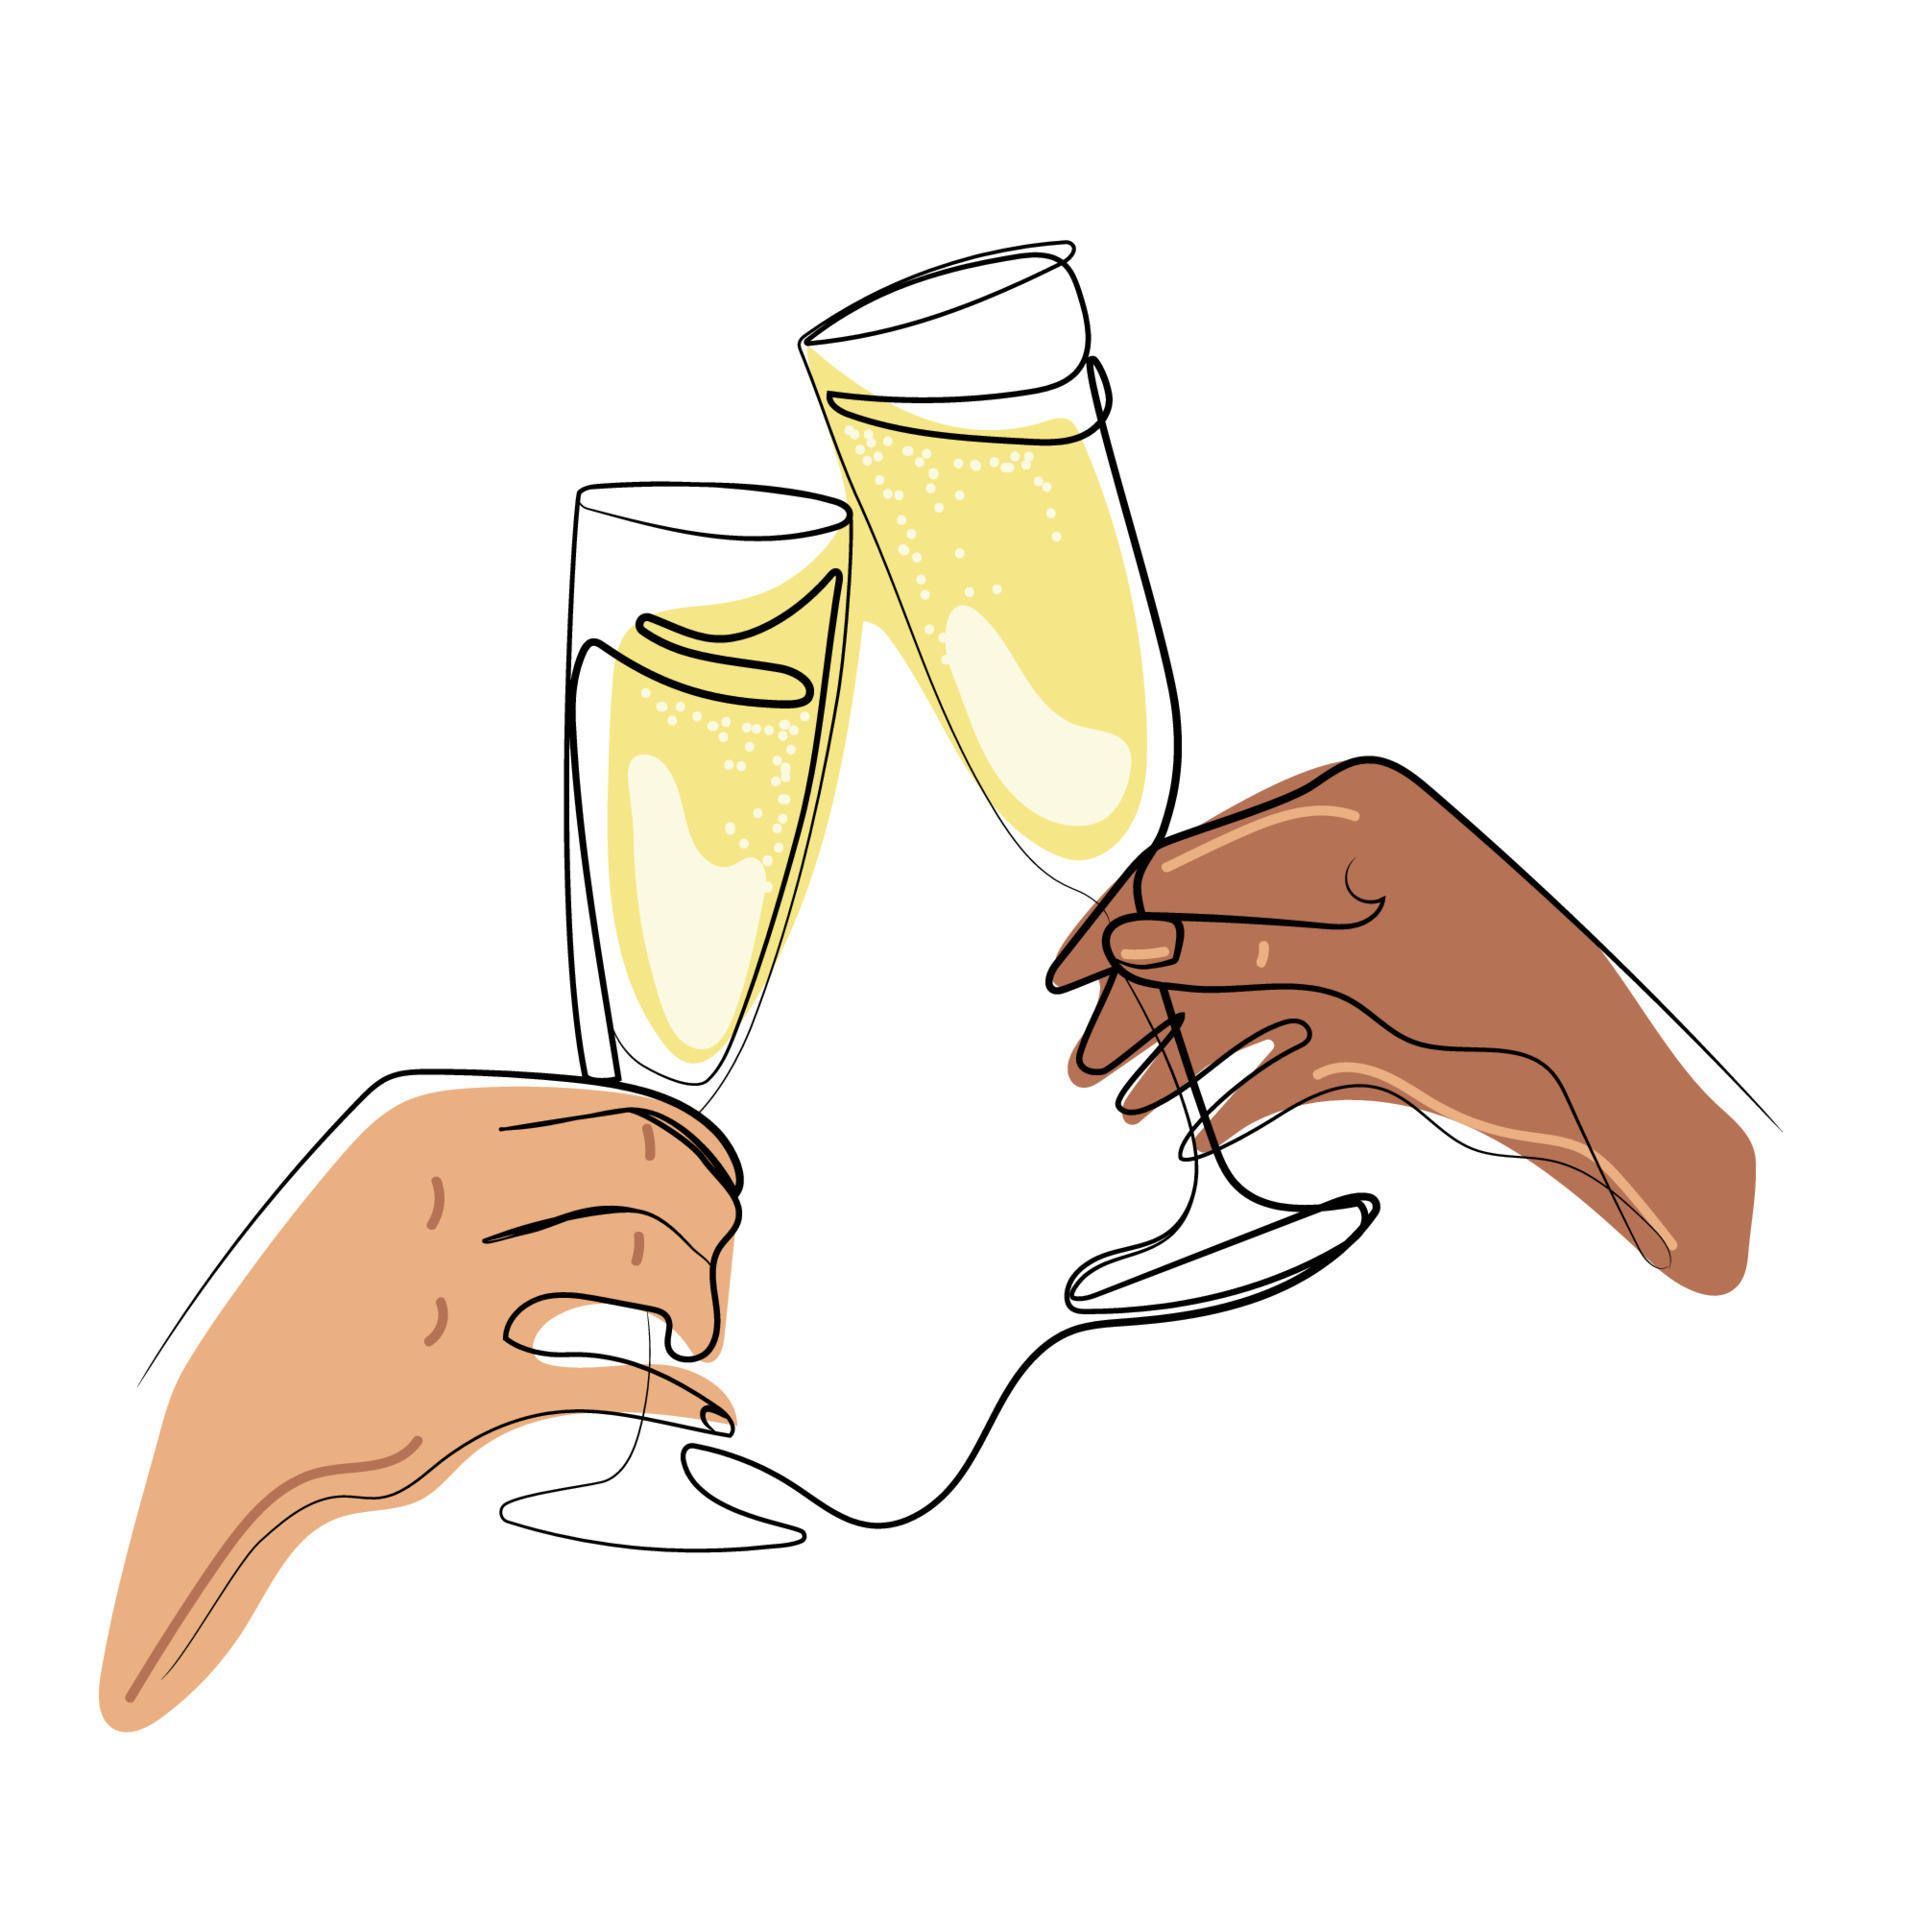 One Line Champagne Glasses Clinktwo Hands Cheering With Glasses Of